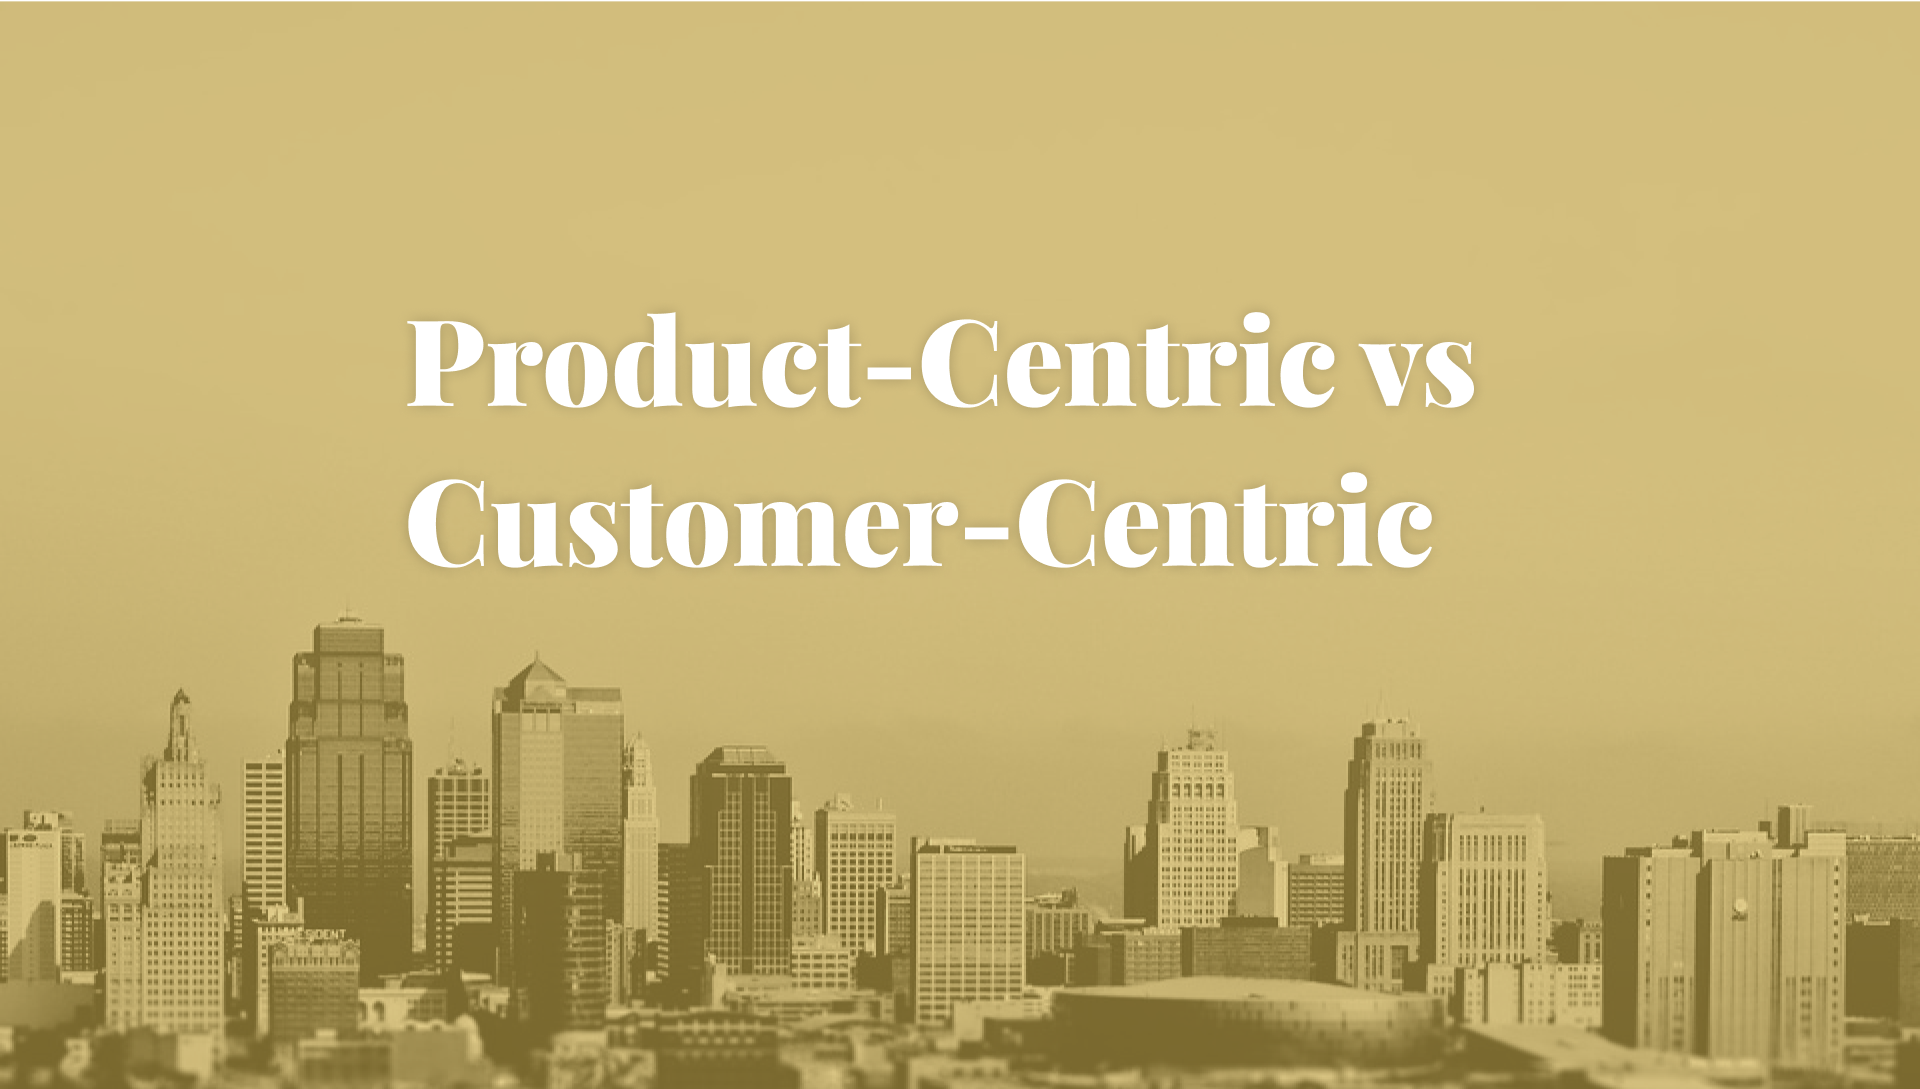 Product-Centric vs Customer-Centric: Which One Is The Best For Your SaaS?